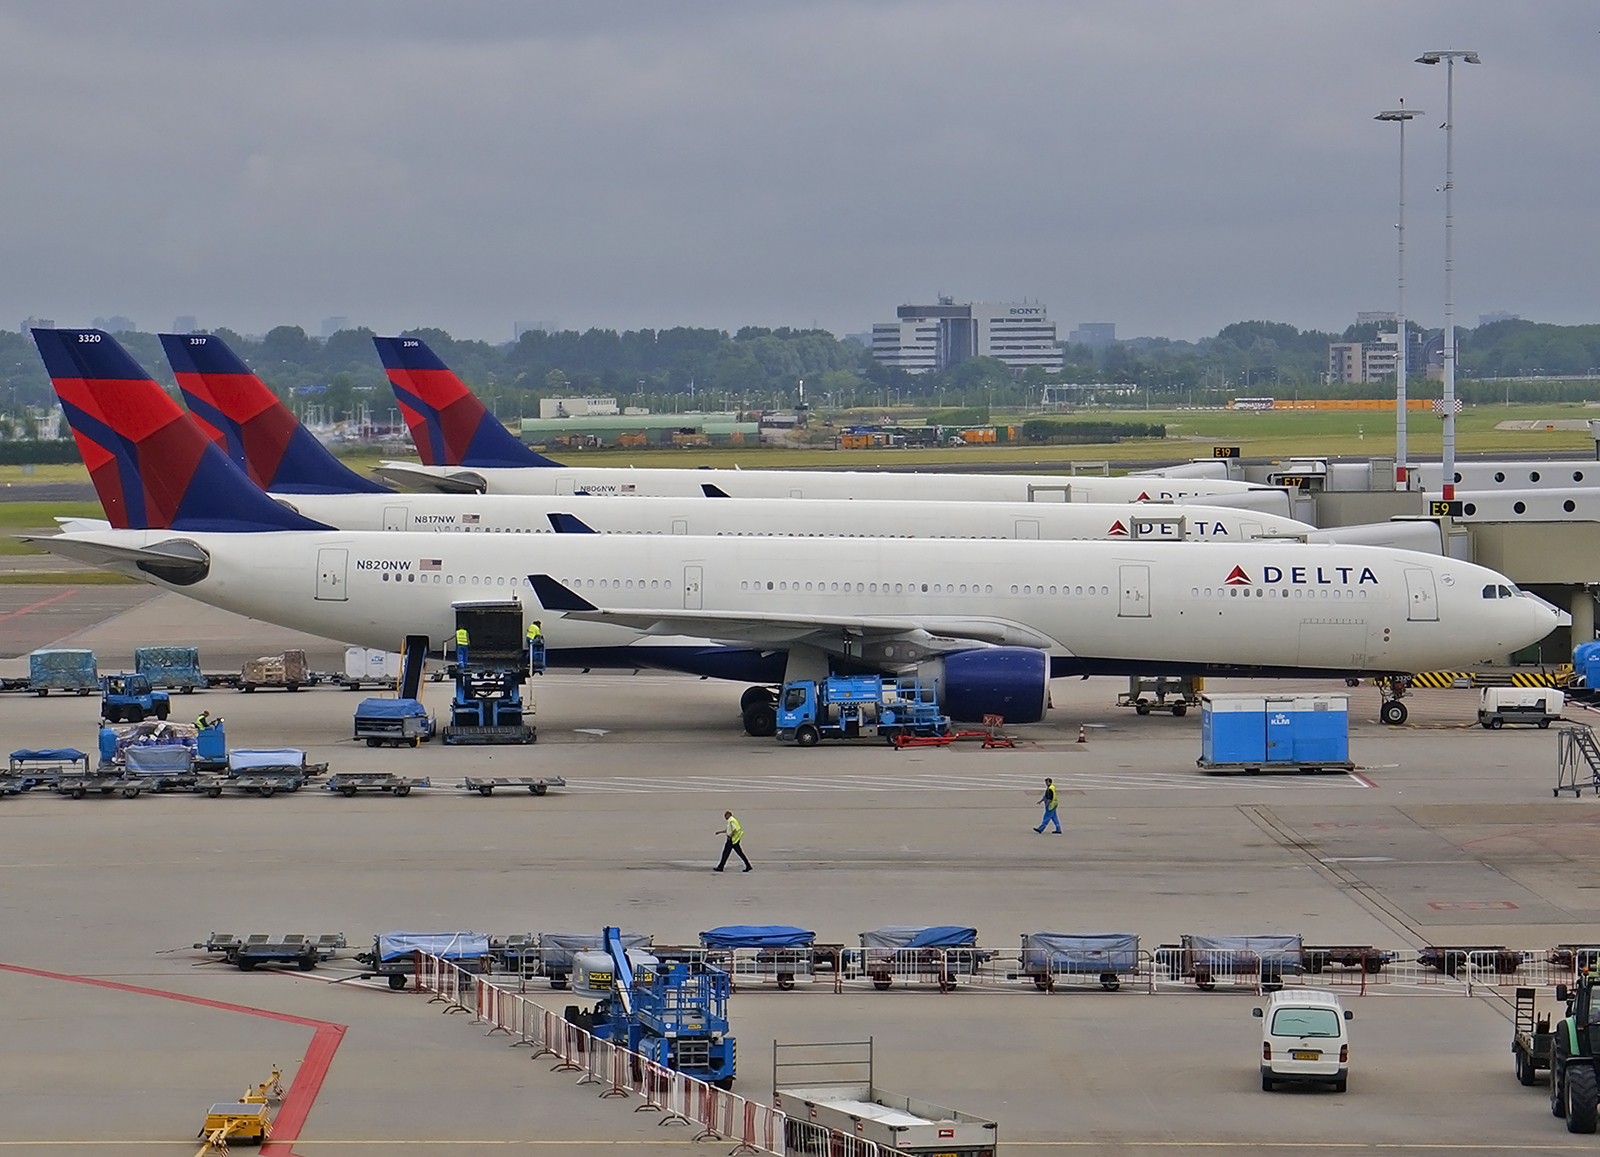 A line of Delta Airlines aircraft parked at the terminal.